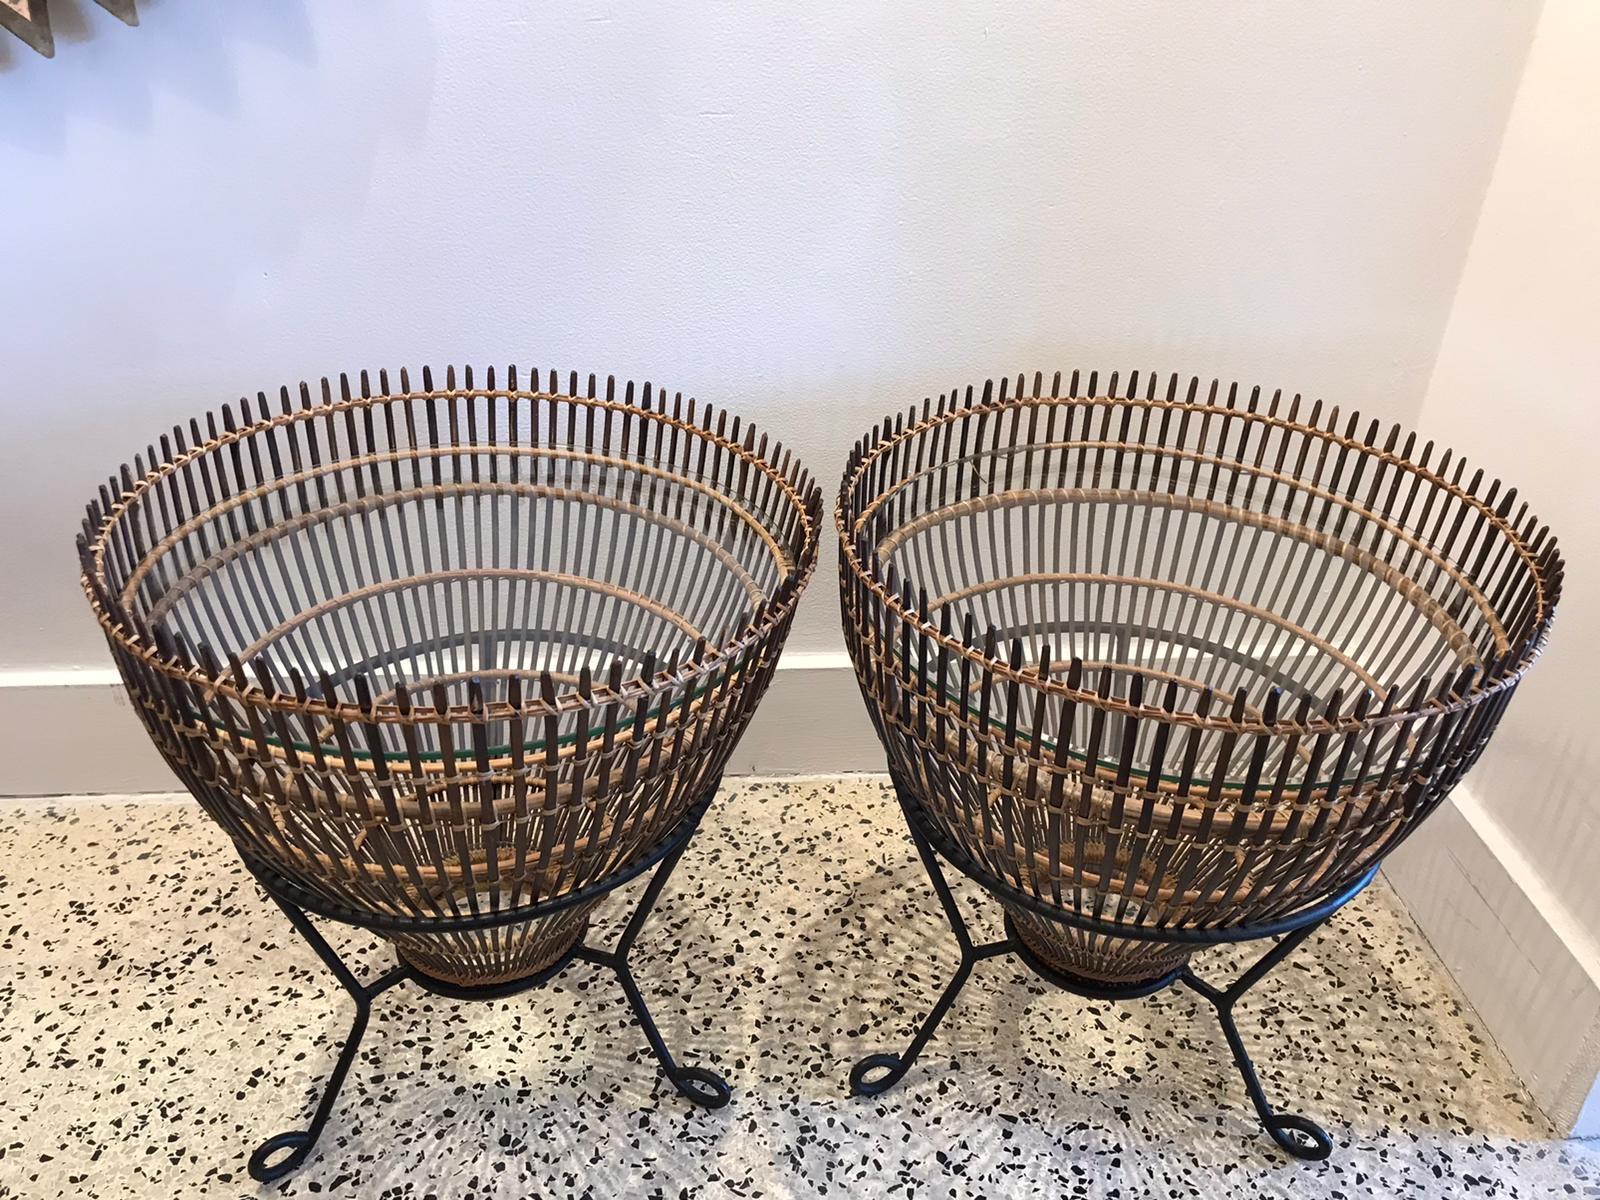 Midcentury pair of fishing basket side tables in the style of Franco Albini. Rattan Bamboo with round glass top and original metal bases.